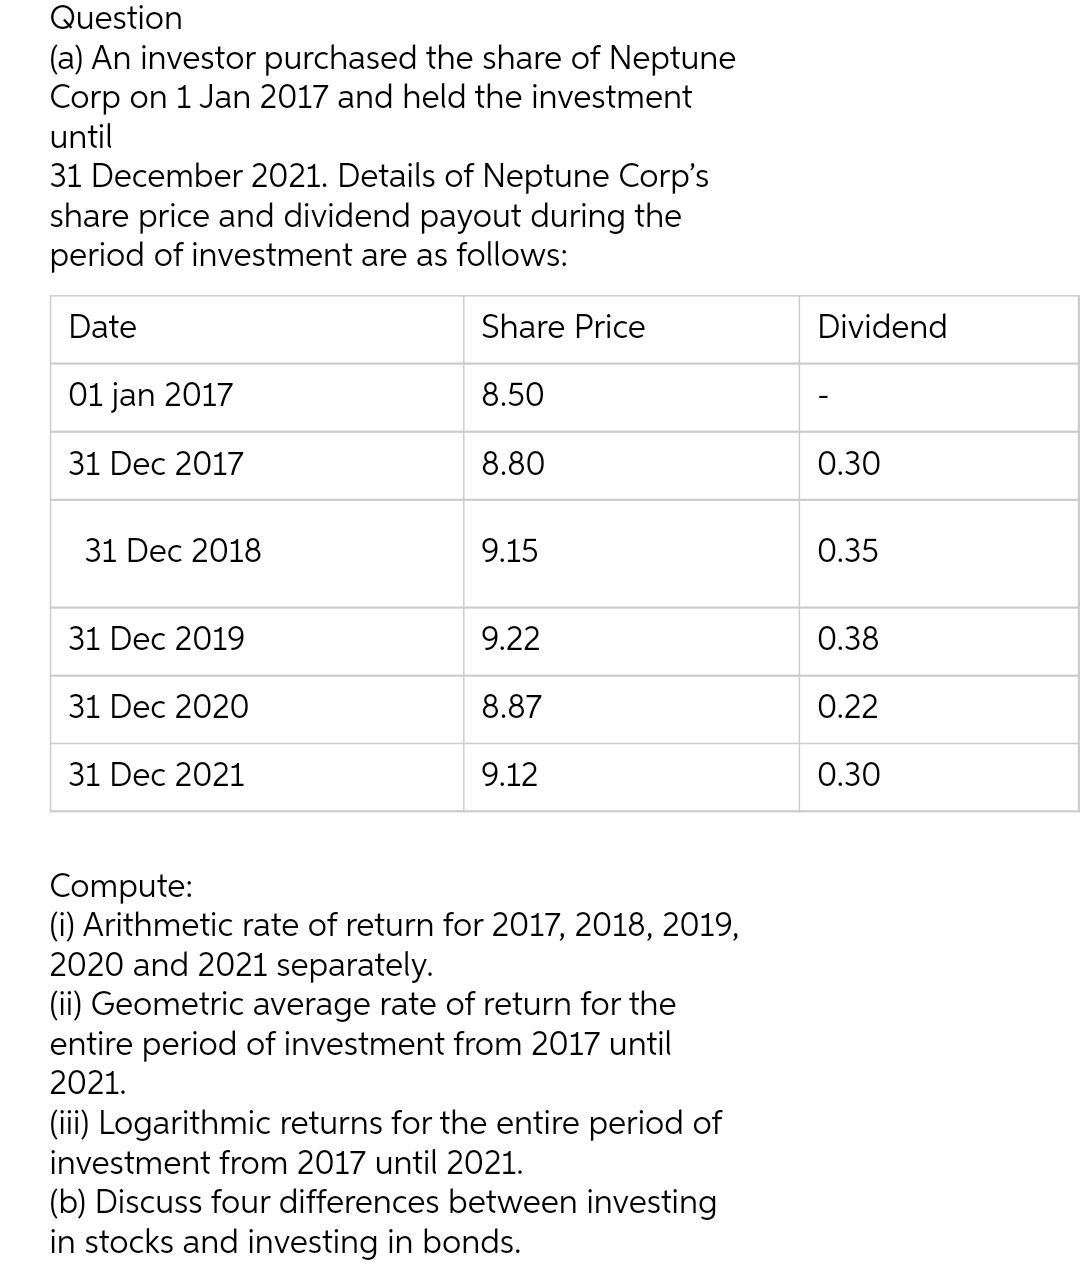 Question
(a) An investor purchased the share of Neptune
Corp on 1 Jan 2017 and held the investment
until
31 December 2021. Details of Neptune Corp's
share price and dividend payout during the
period of investment are as follows:
Date
Share Price
01 jan 2017
8.50
31 Dec 2017
8.80
31 Dec 2018
9.15
31 Dec 2019
9.22
31 Dec 2020
8.87
31 Dec 2021
9.12
Compute:
(i) Arithmetic rate of return for 2017, 2018, 2019,
2020 and 2021 separately.
(ii) Geometric average rate of return for the
entire period of investment from 2017 until
2021.
(iii) Logarithmic returns for the entire period of
investment from 2017 until 2021.
(b) Discuss four differences between investing
in stocks and investing in bonds.
Dividend
0.30
0.35
0.38
0.22
0.30